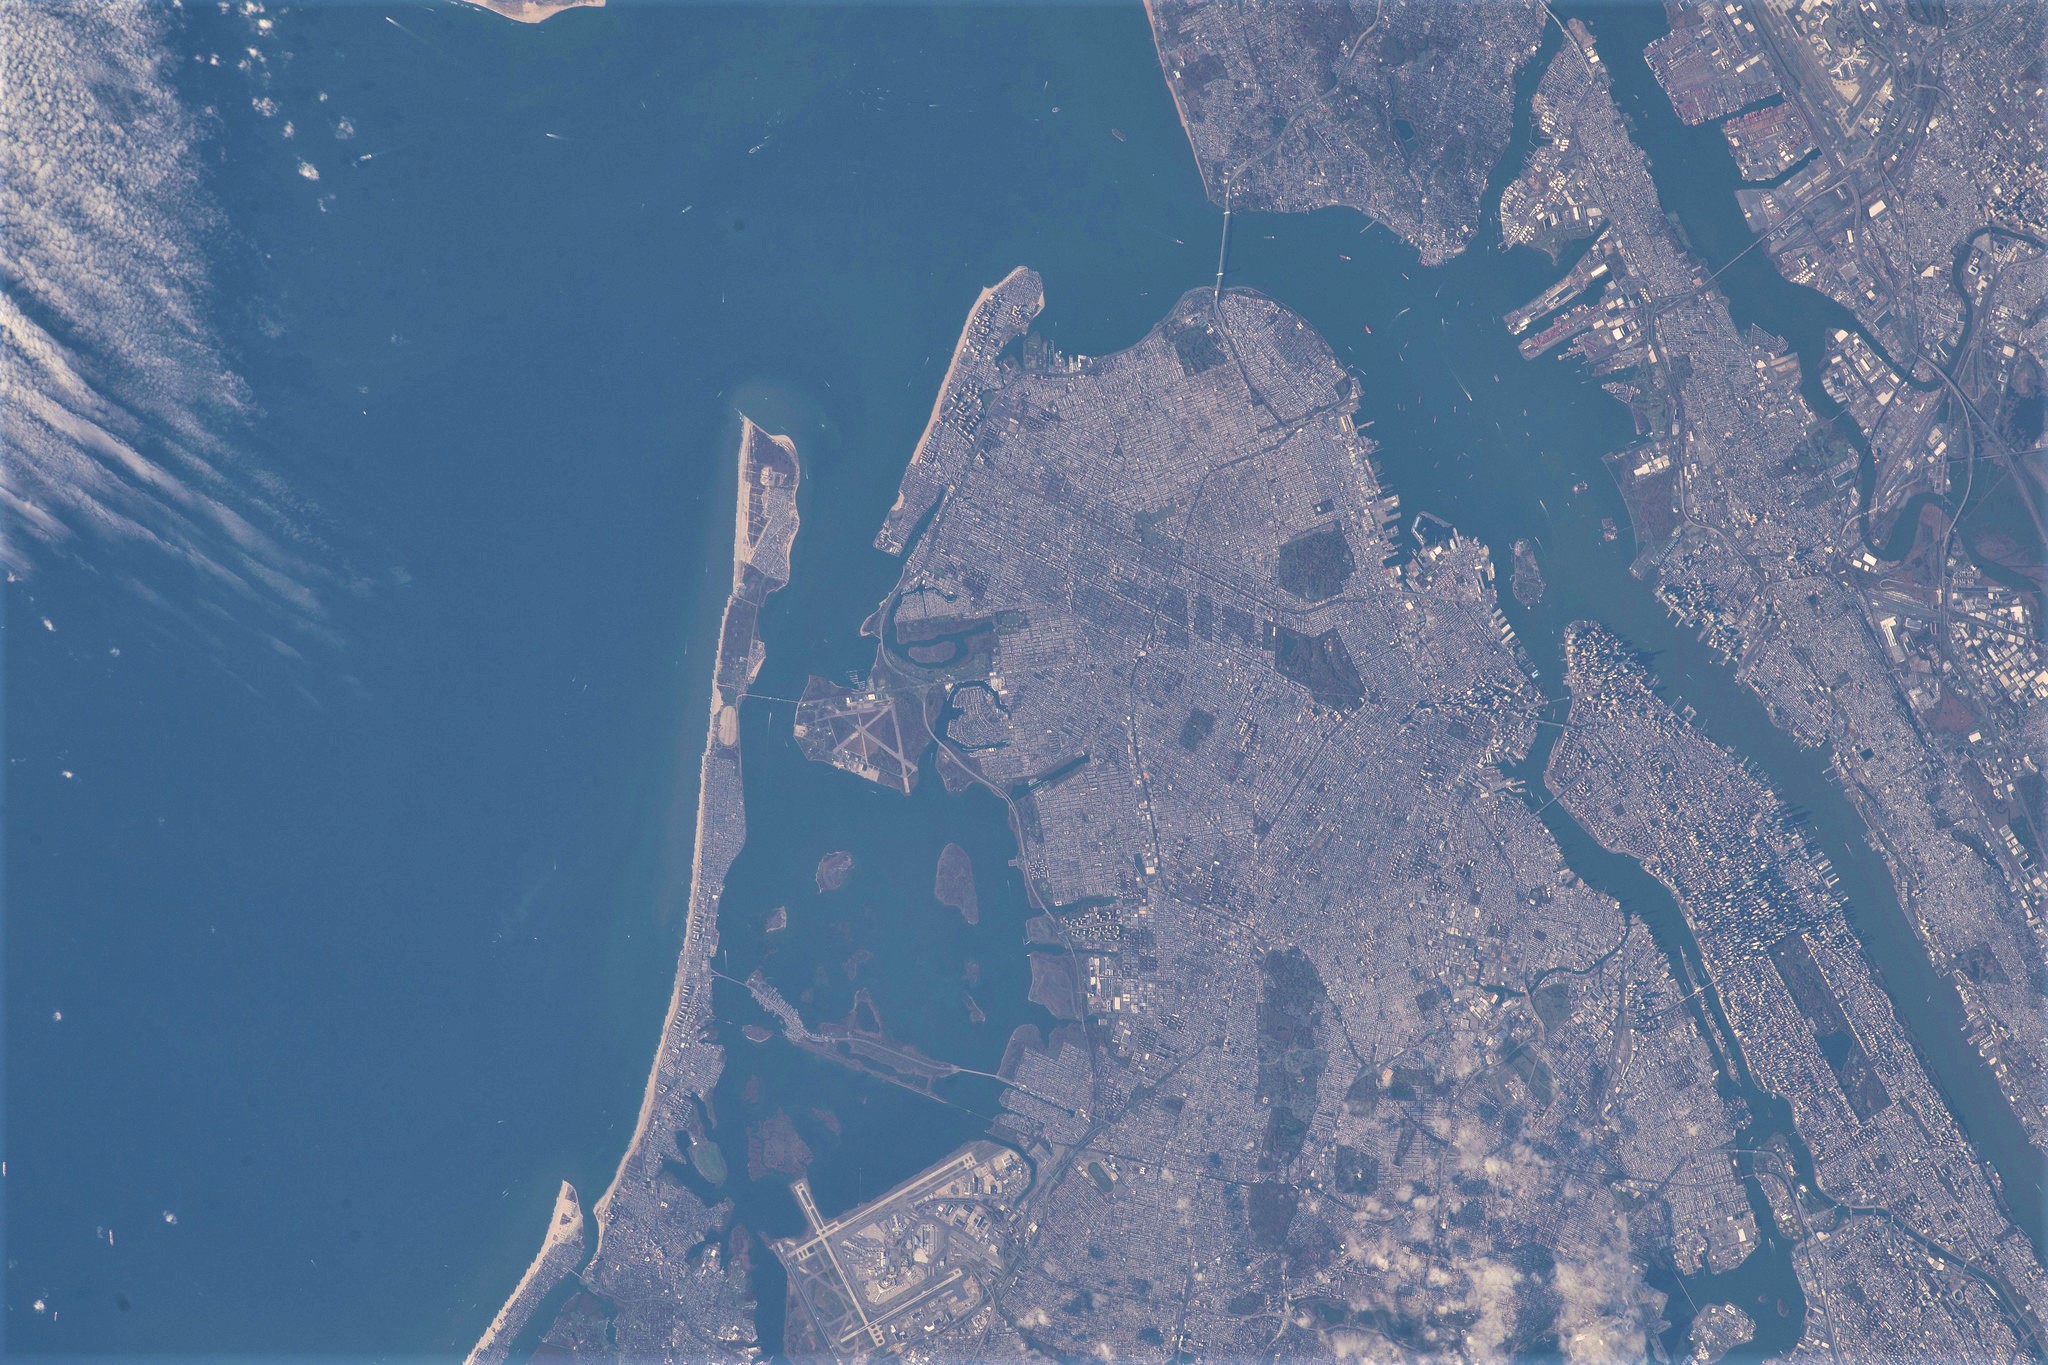 This image, taken as the International Space Station orbits above the Atlantic Ocean, shows the New York City boroughs of Queens, Brooklyn, and Manhattan and portions of the Bronx and Staten Island. 